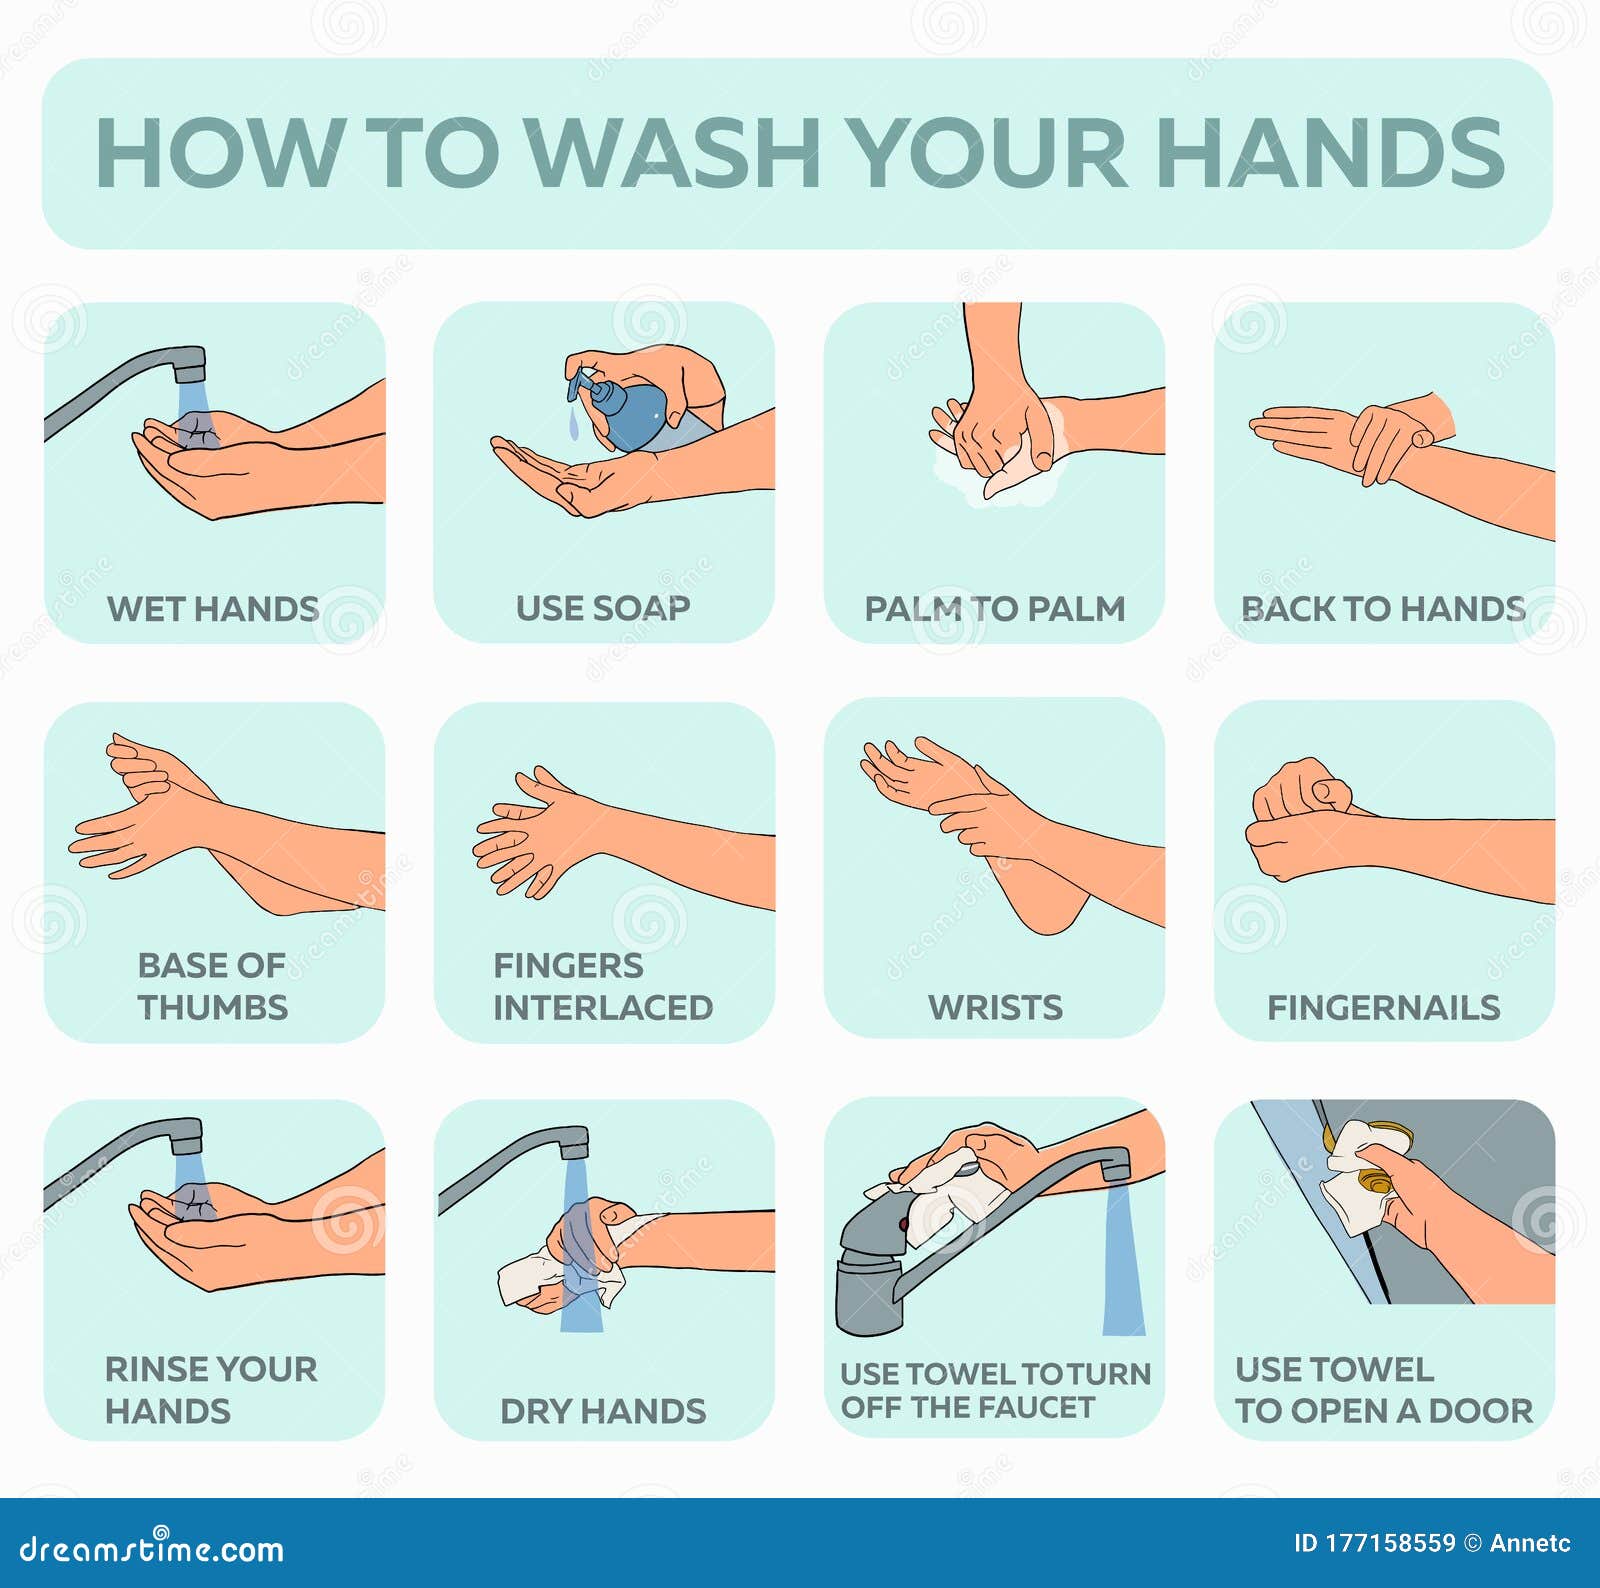 3-step-to-how-to-use-hand-sanitizer-infographic-element-cartoon-vector